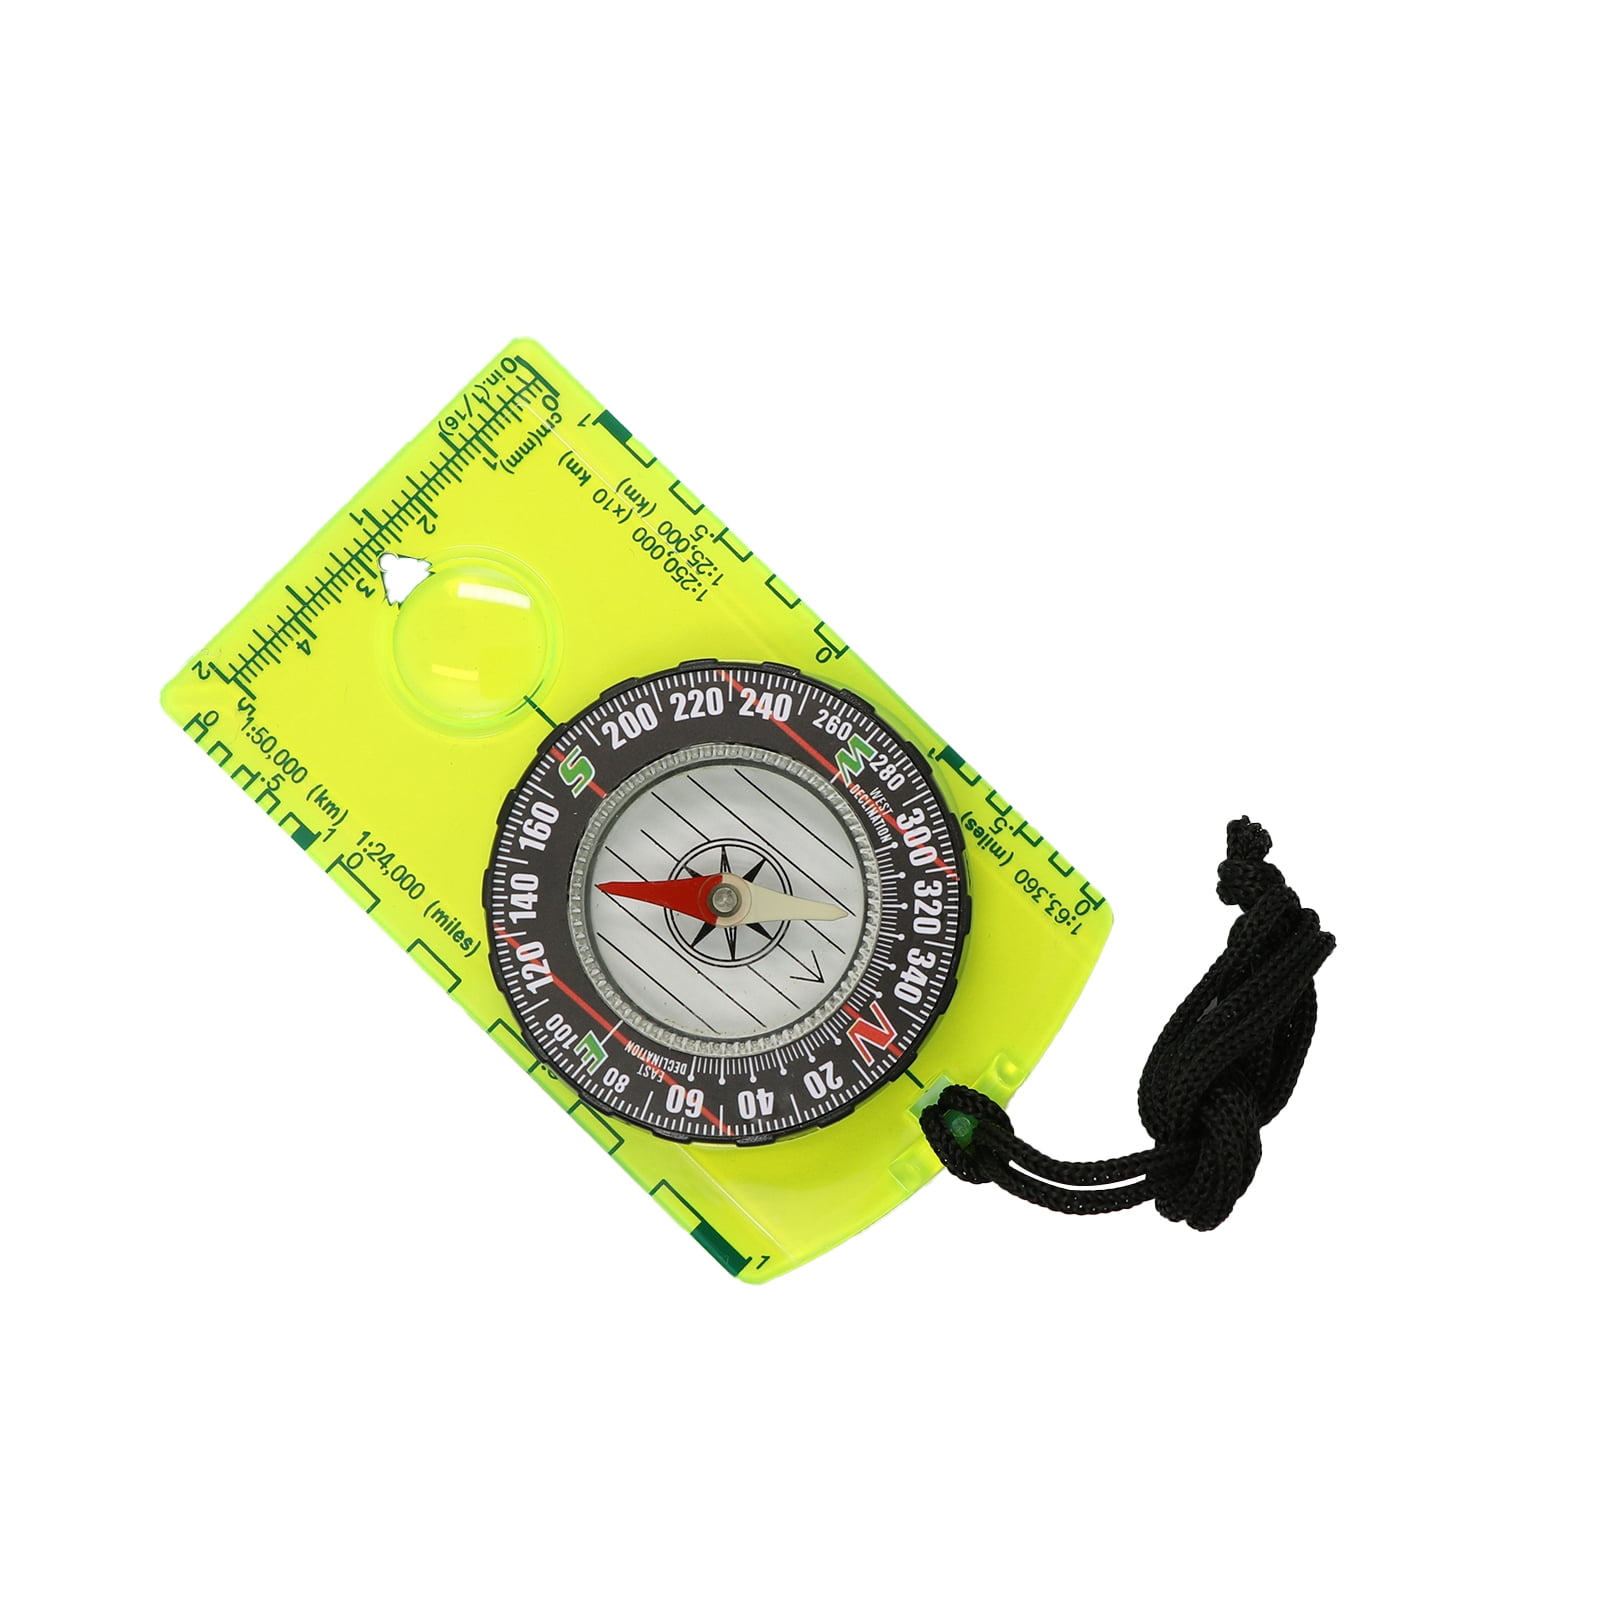 Baseplate Pocket Compass Military Orienteering Hiking Camping Maps Lensatic Army 